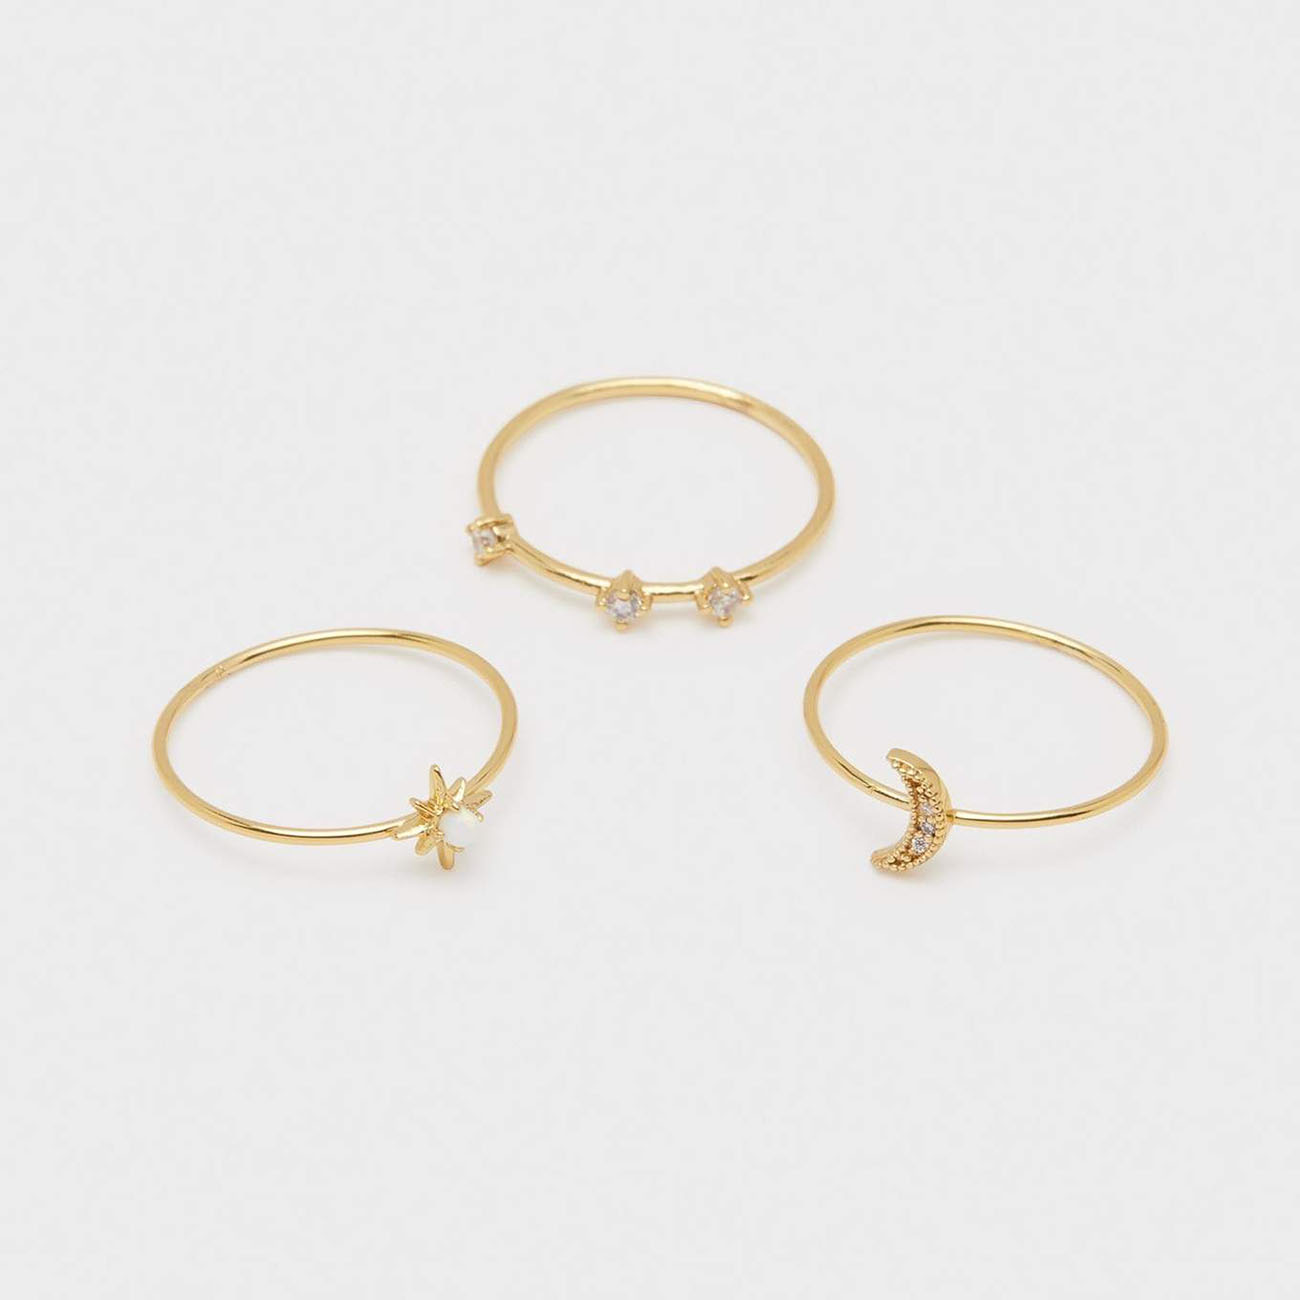 A lovely set of dainty gold rings.